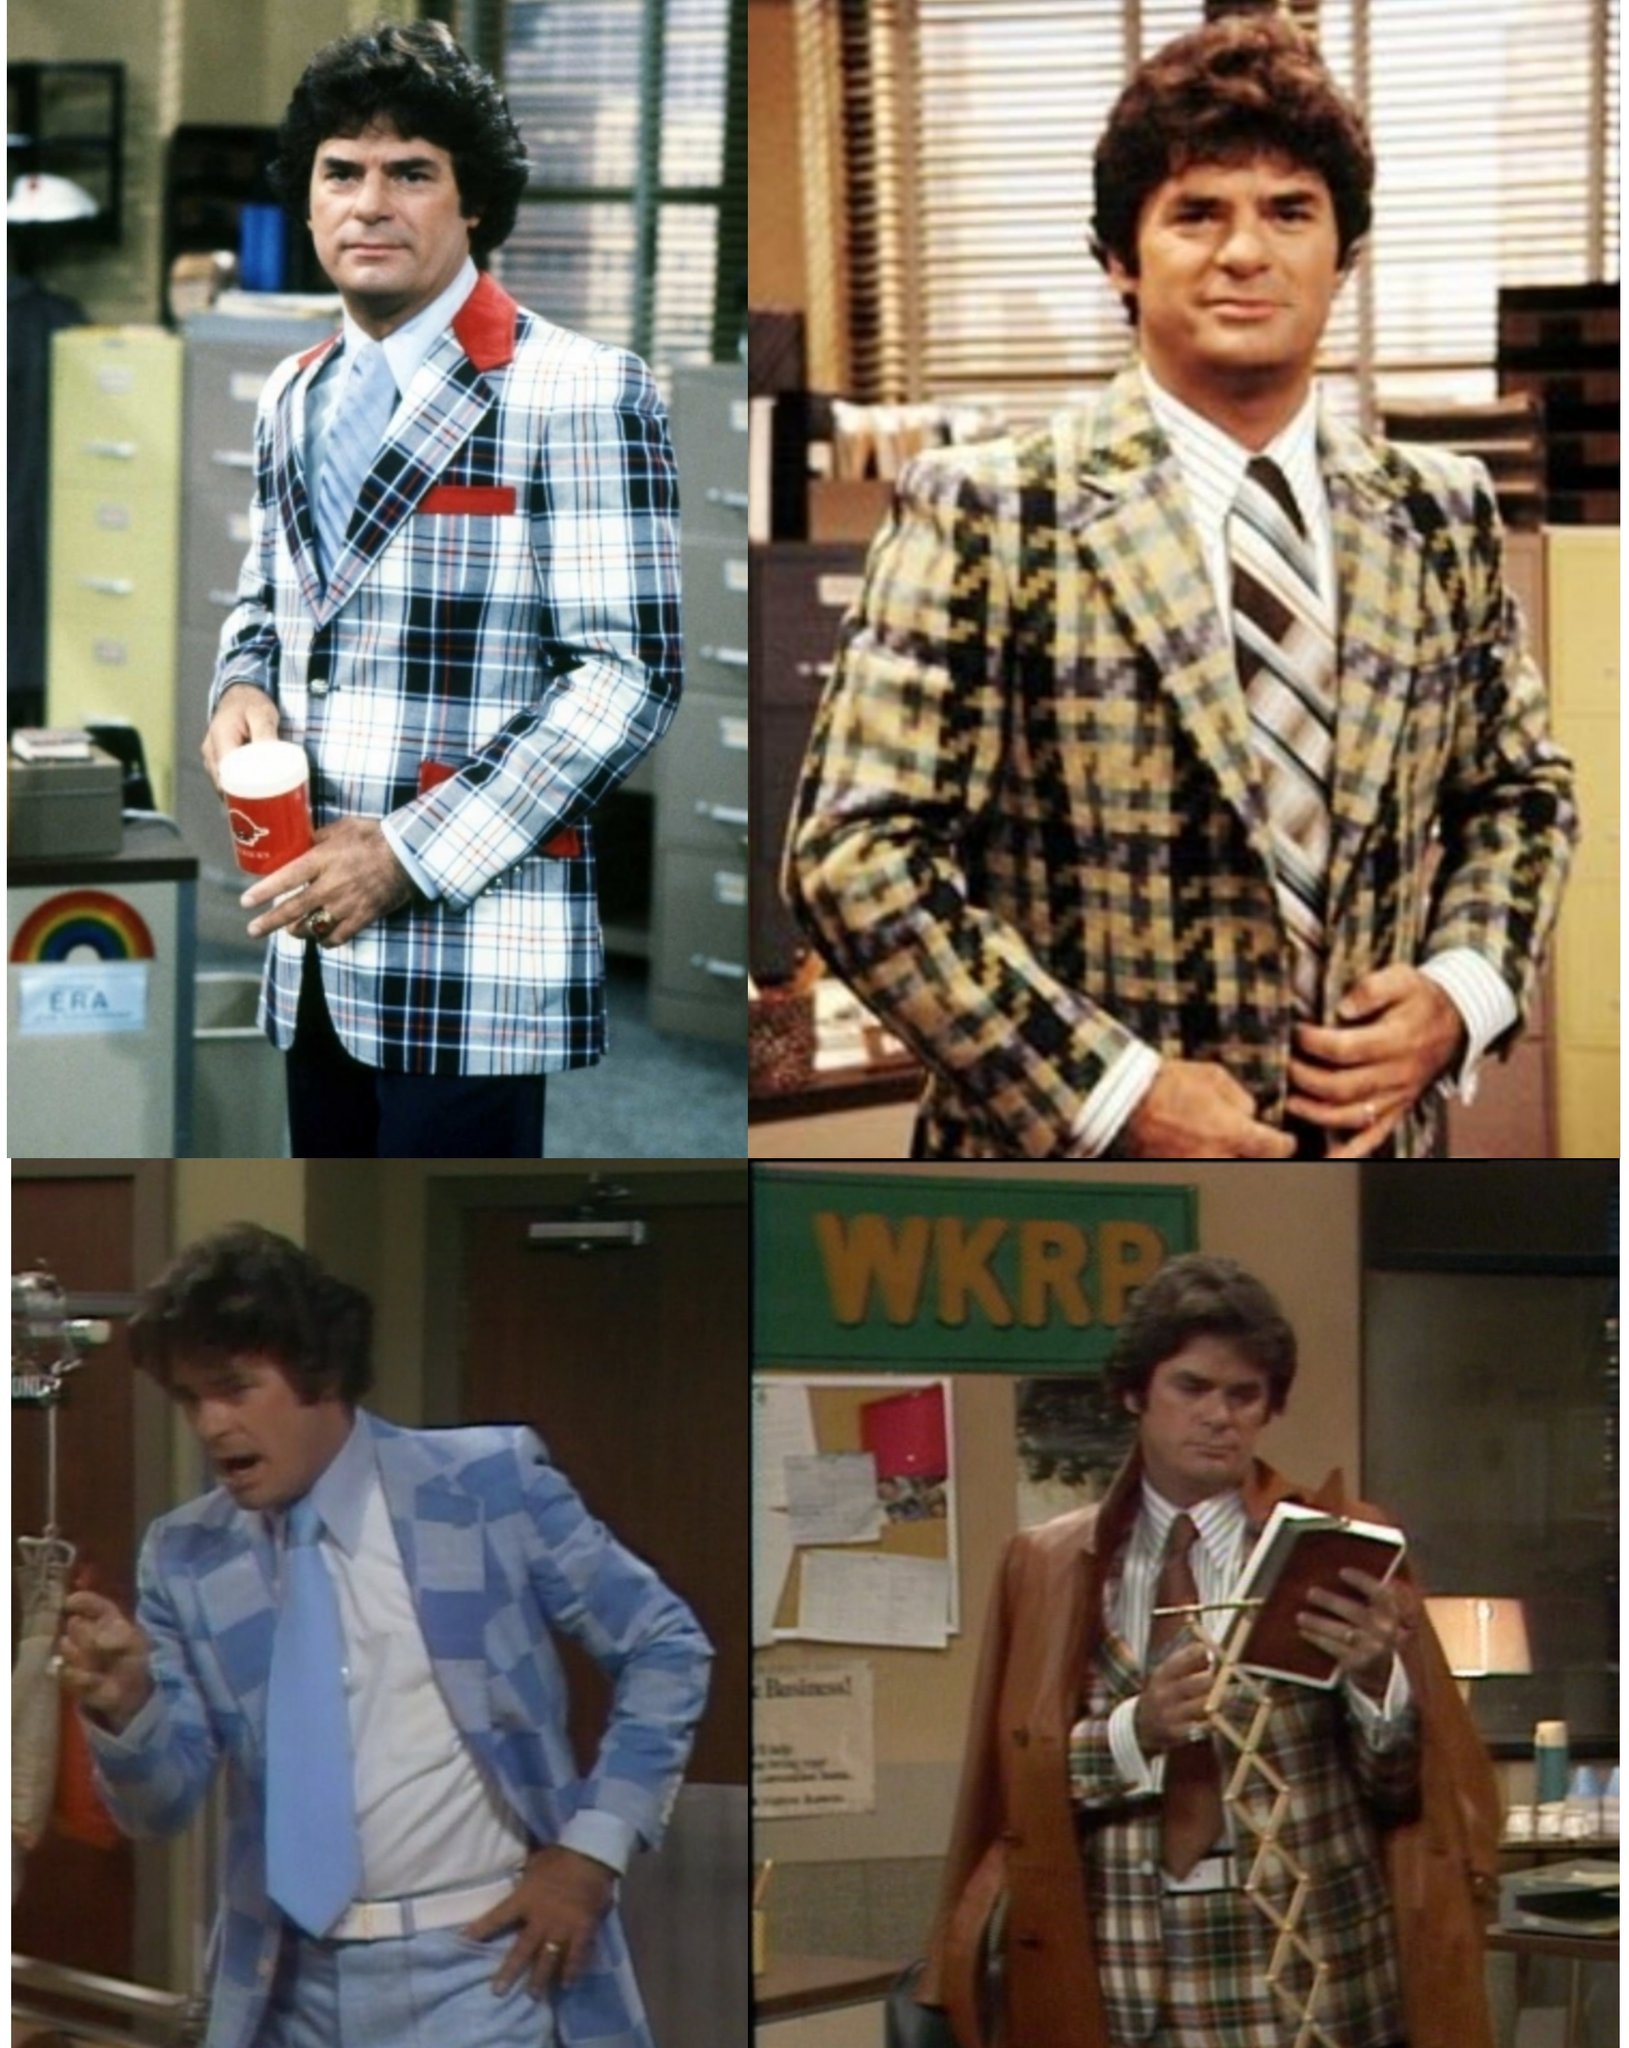 Jonathon Jackson on Twitter: "RIP actor Frank Bonner, aka WKRP sales  manager Herb Tarlek, by far the most stylish salesman in the entire history  of advertising. https://t.co/xn2MqgwrON" / Twitter